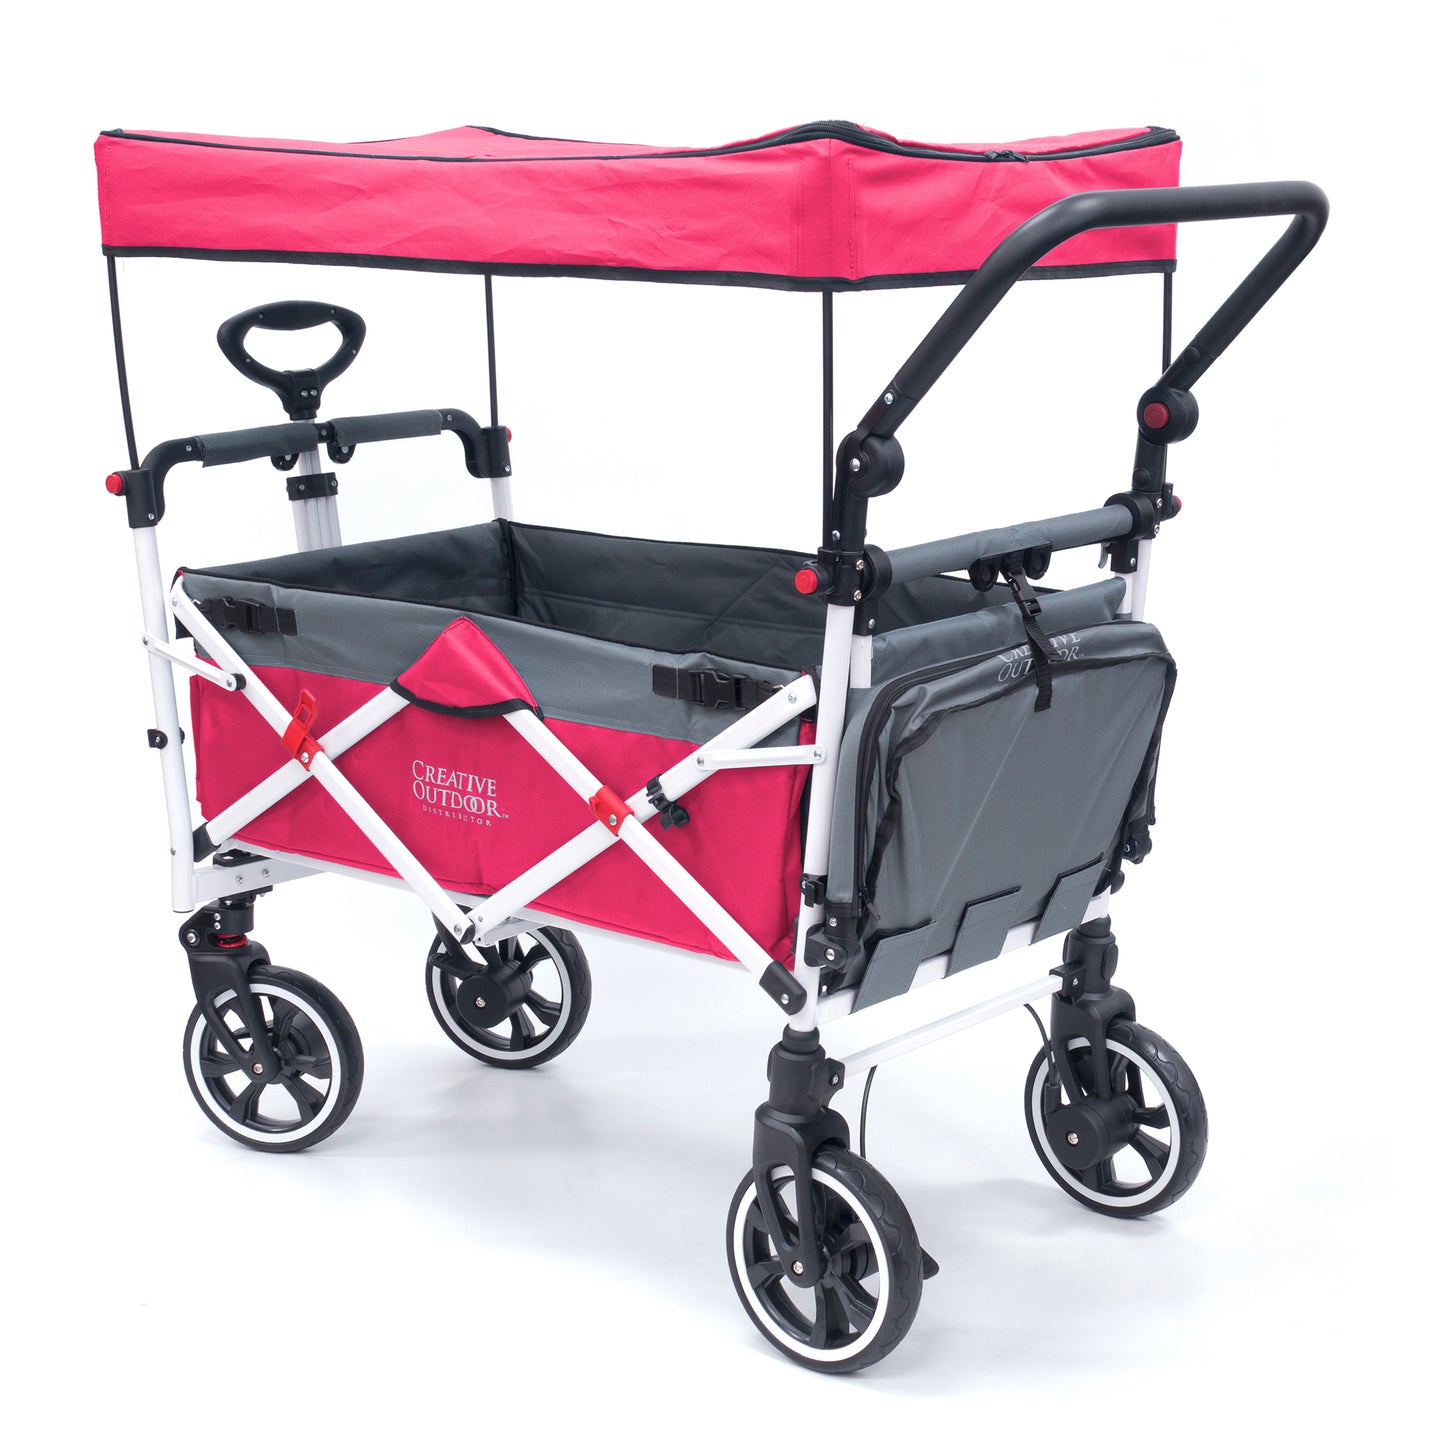 push-pull-titanium-series-plus-folding-wagon-stroller-with-canopy-pink